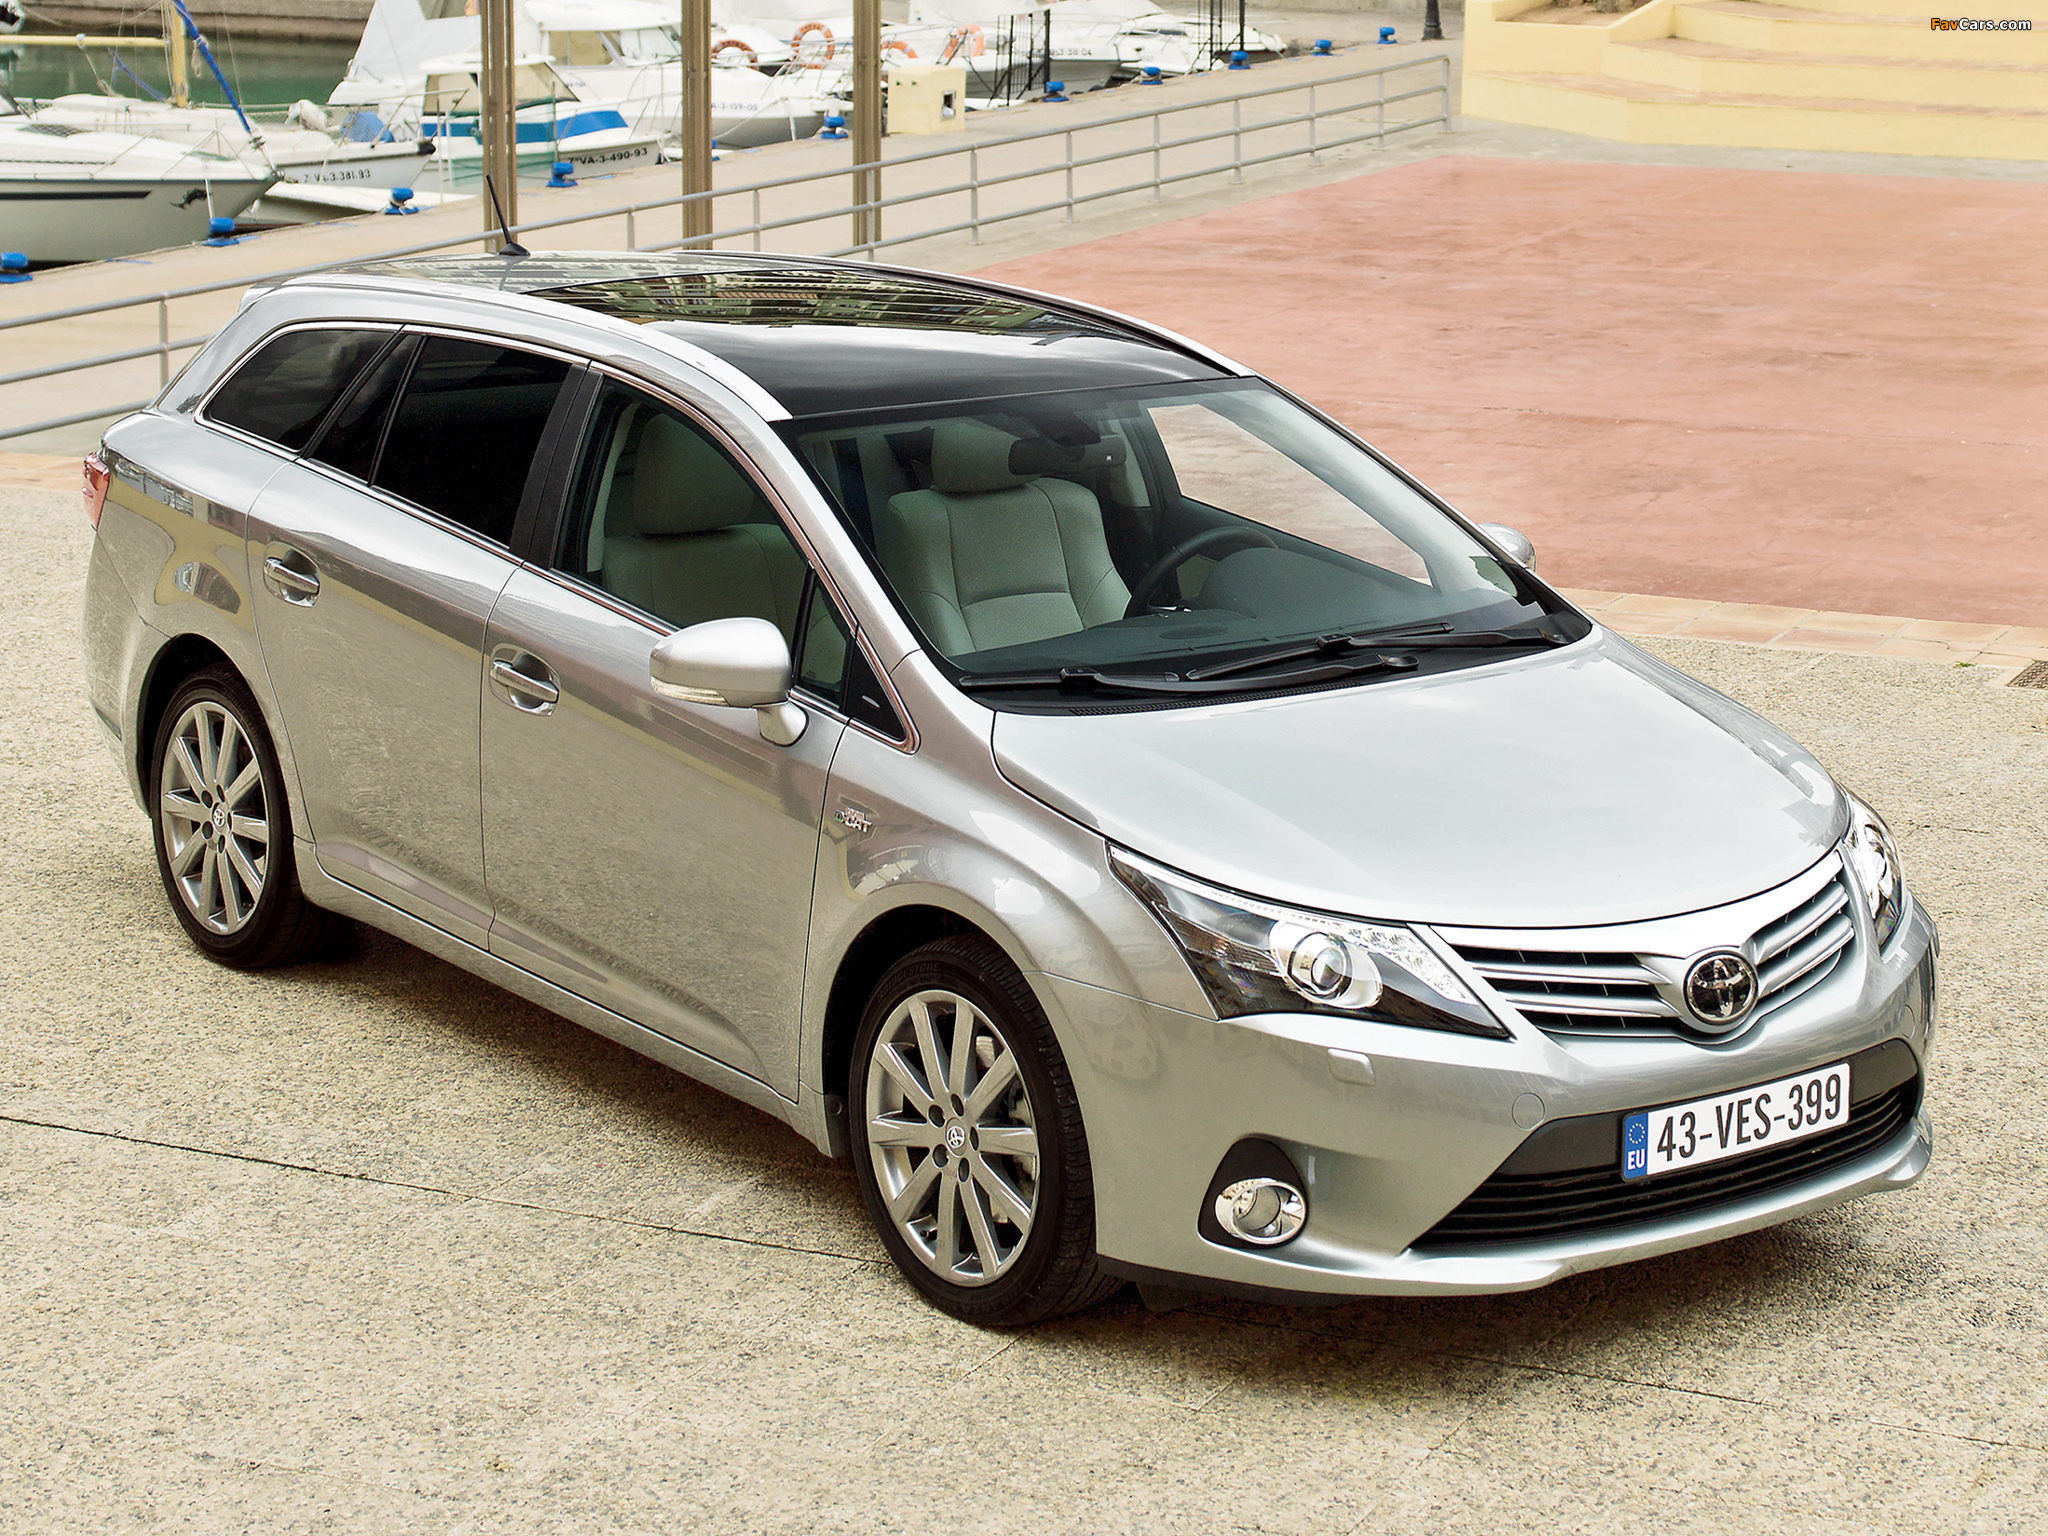 Toyota Avensis Wagon 2011 pictures (2048 x 1536)